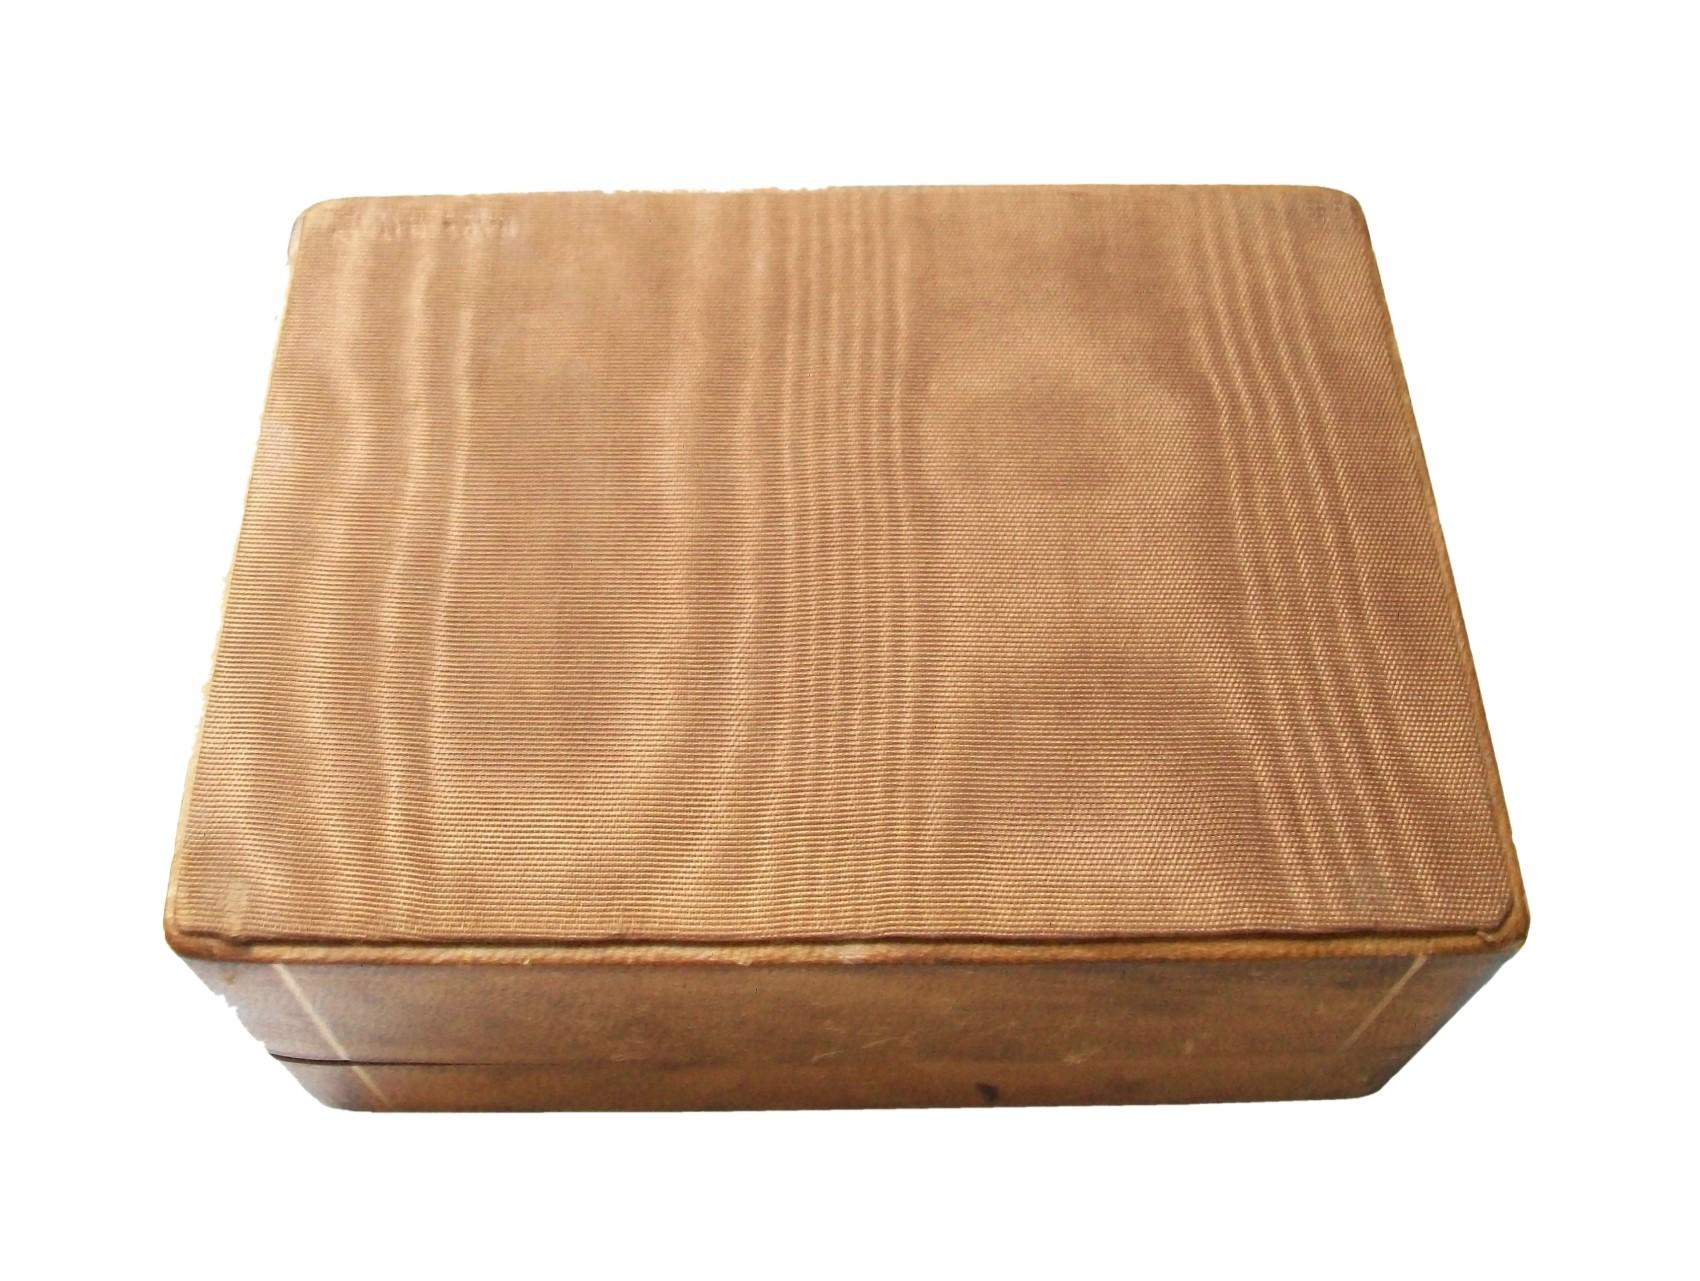 20th Century Midcentury Leather Box - Gilded Details - Wood Lined - Italy - circa 1950s For Sale